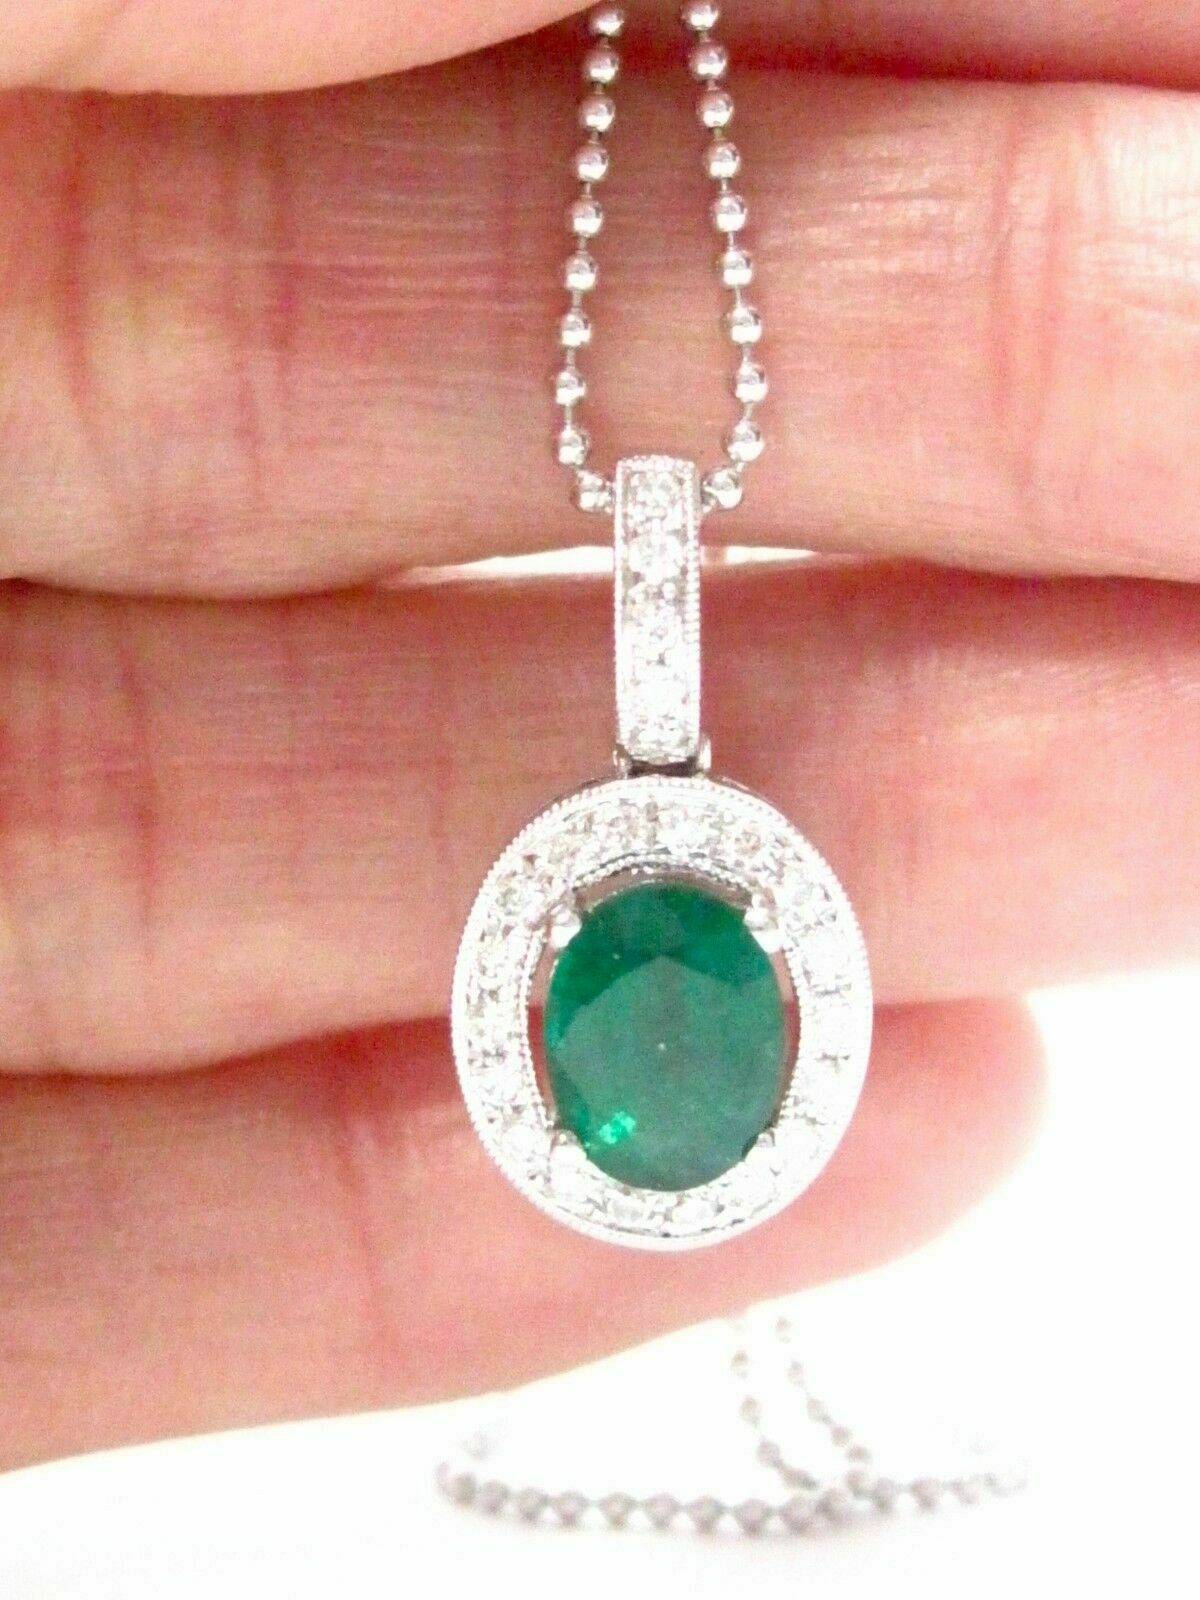 1.51 TCW Natural Oval Cut Green Emerald & Round White Diamonds Pendant Necklace